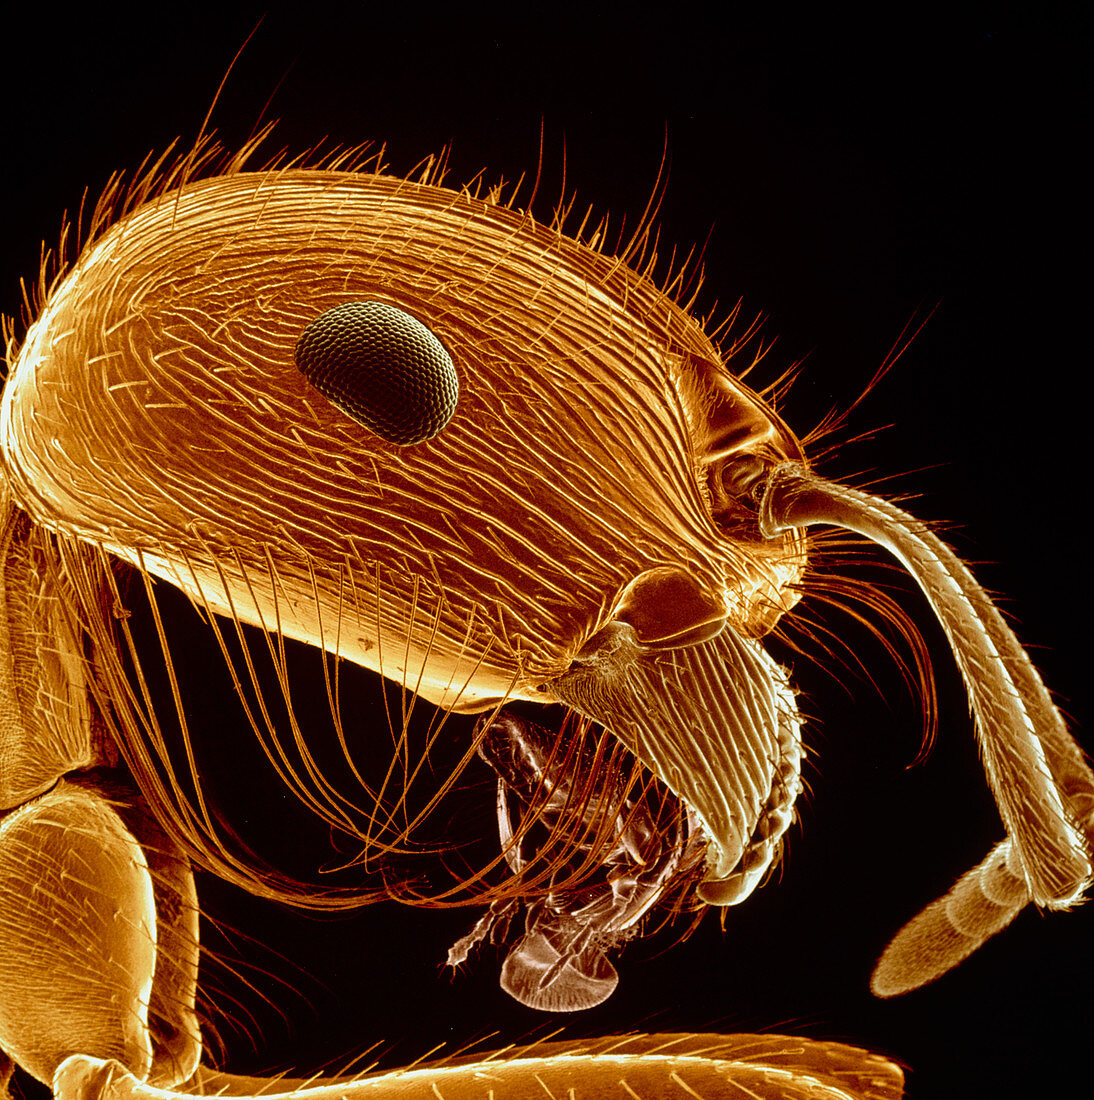 Colour SEM of the head of a red ant,Pogonomyrmex